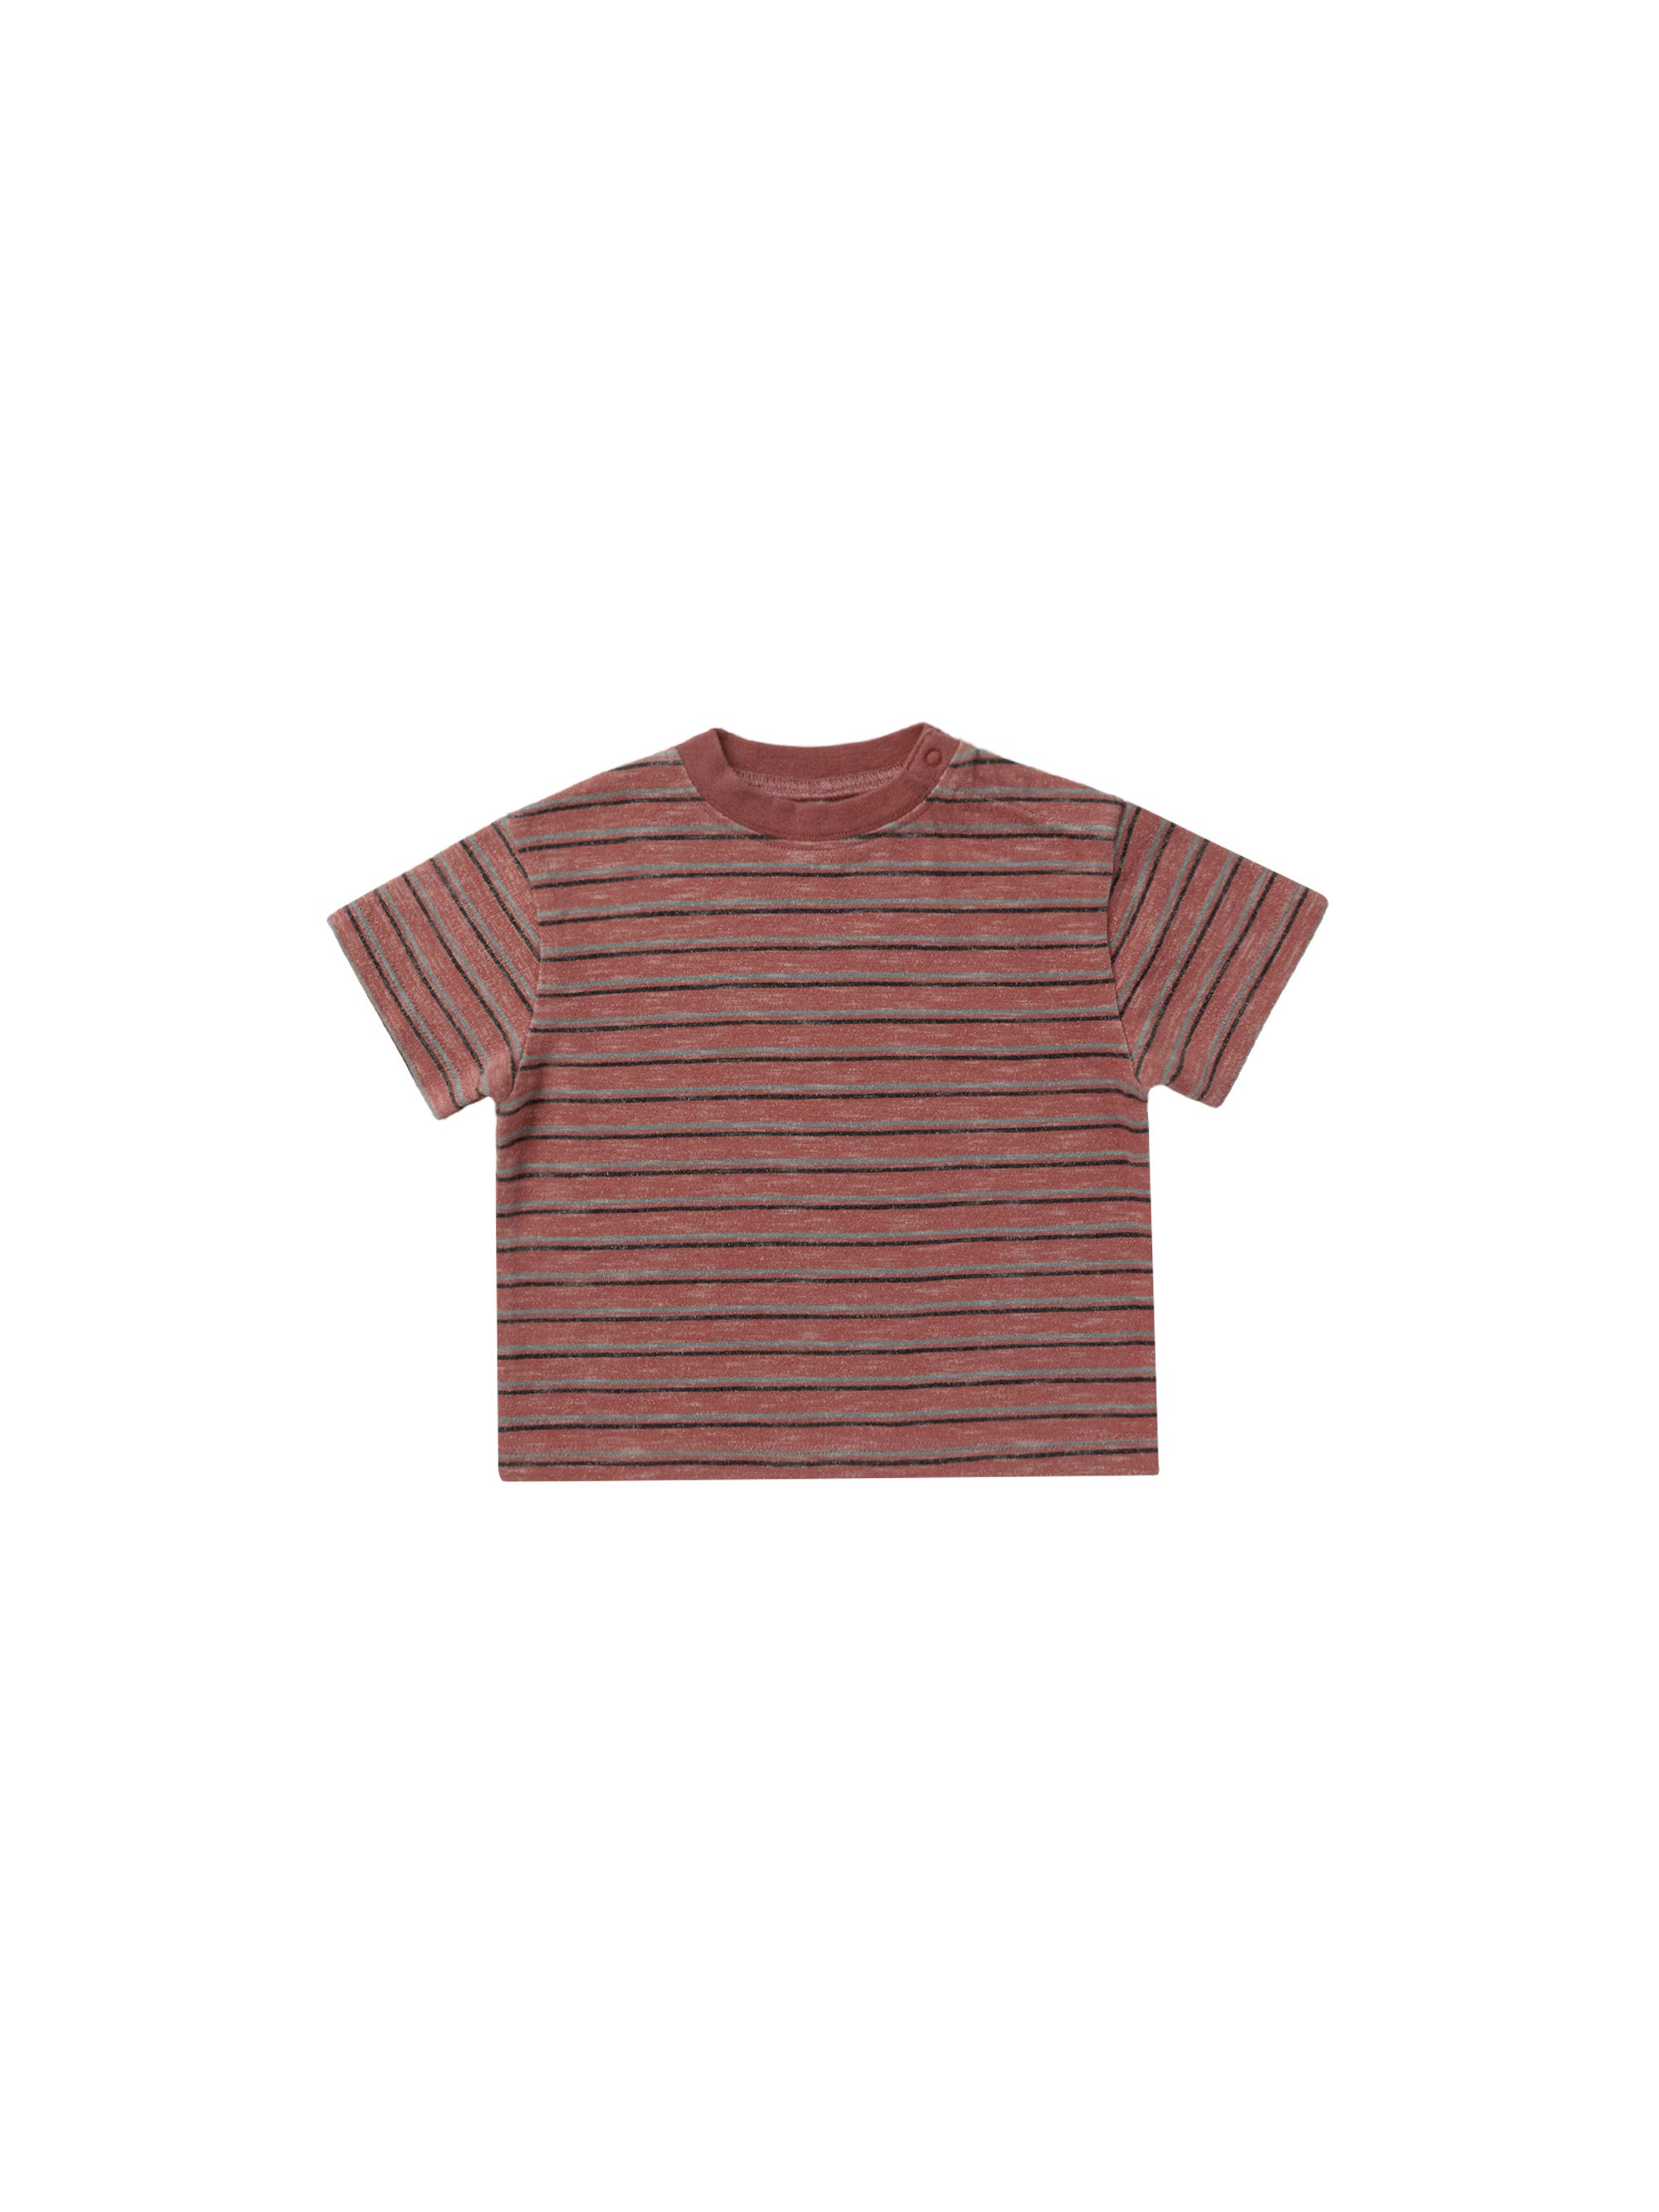 Relaxed Tee || Red Multi-Stripe